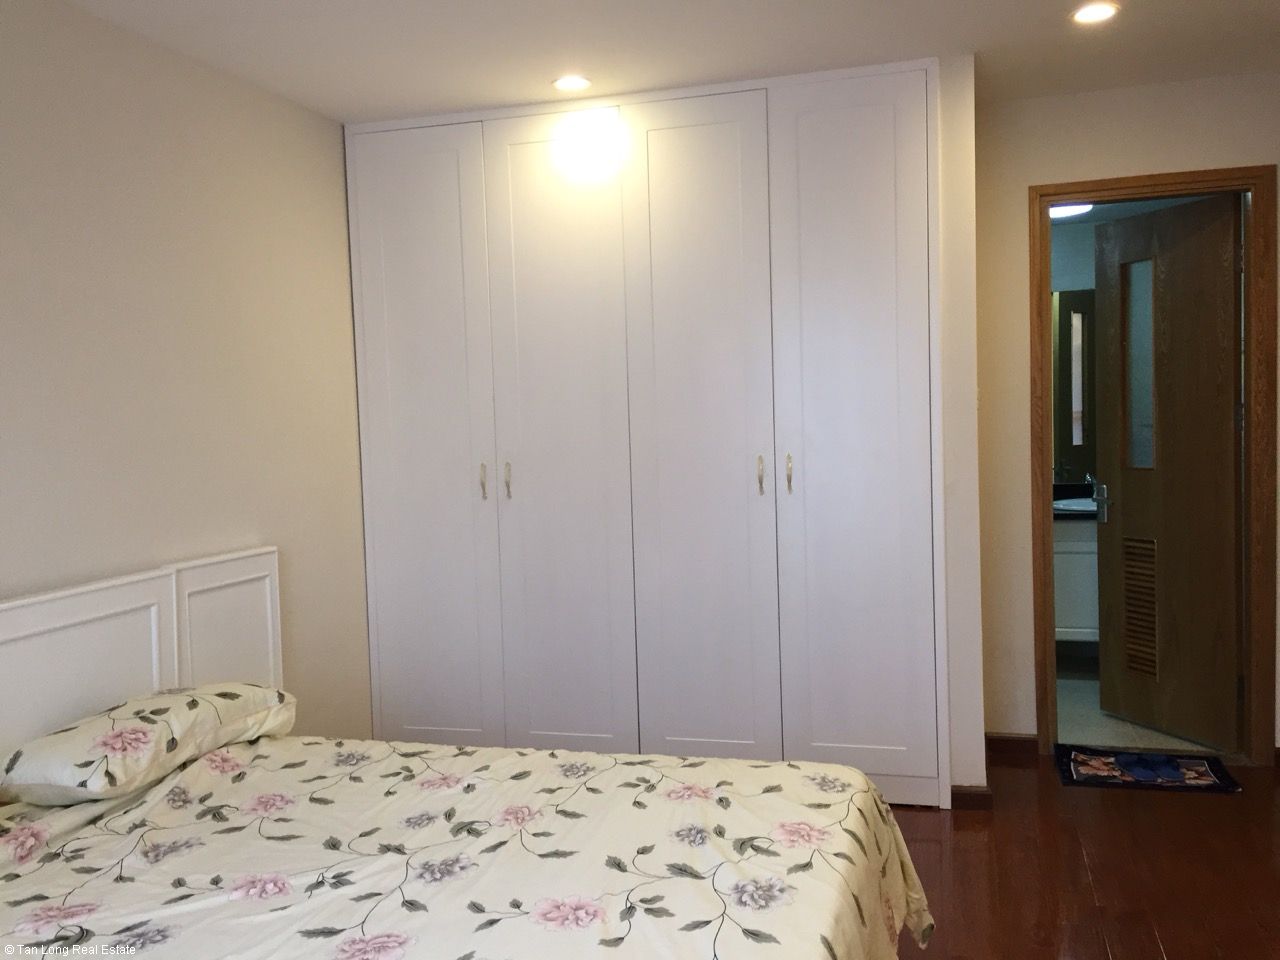 Brand new 3 bedroom furnished apartment in N04 building for rent on Hoang Dao Thuy street, Trung Hoa Nhan Chinh, Cau Giay 4